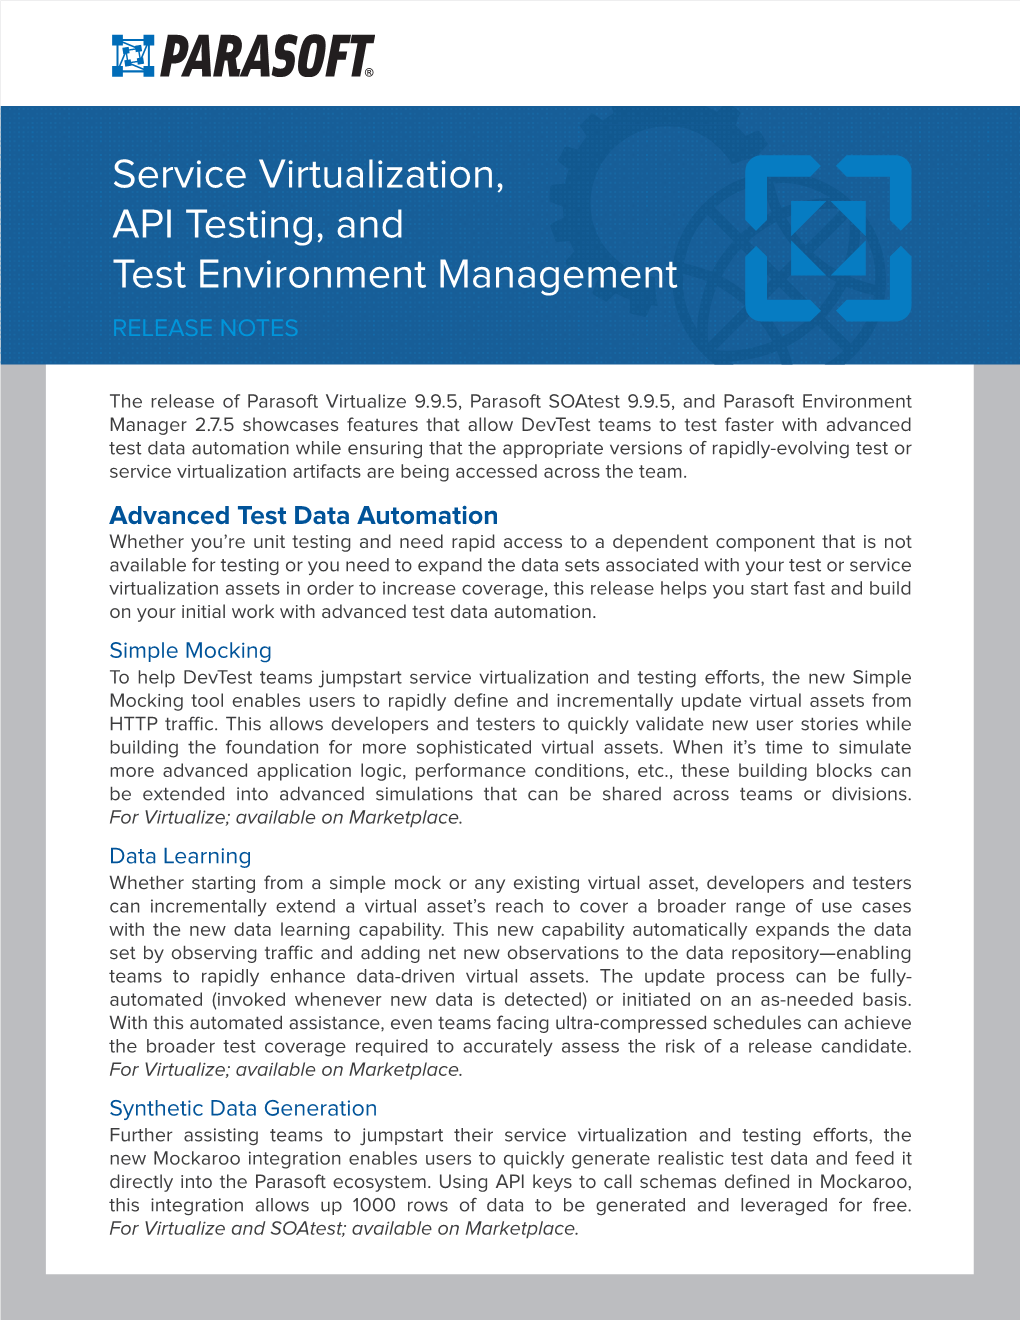 Service Virtualization, API Testing, and Test Environment Management Release Notes